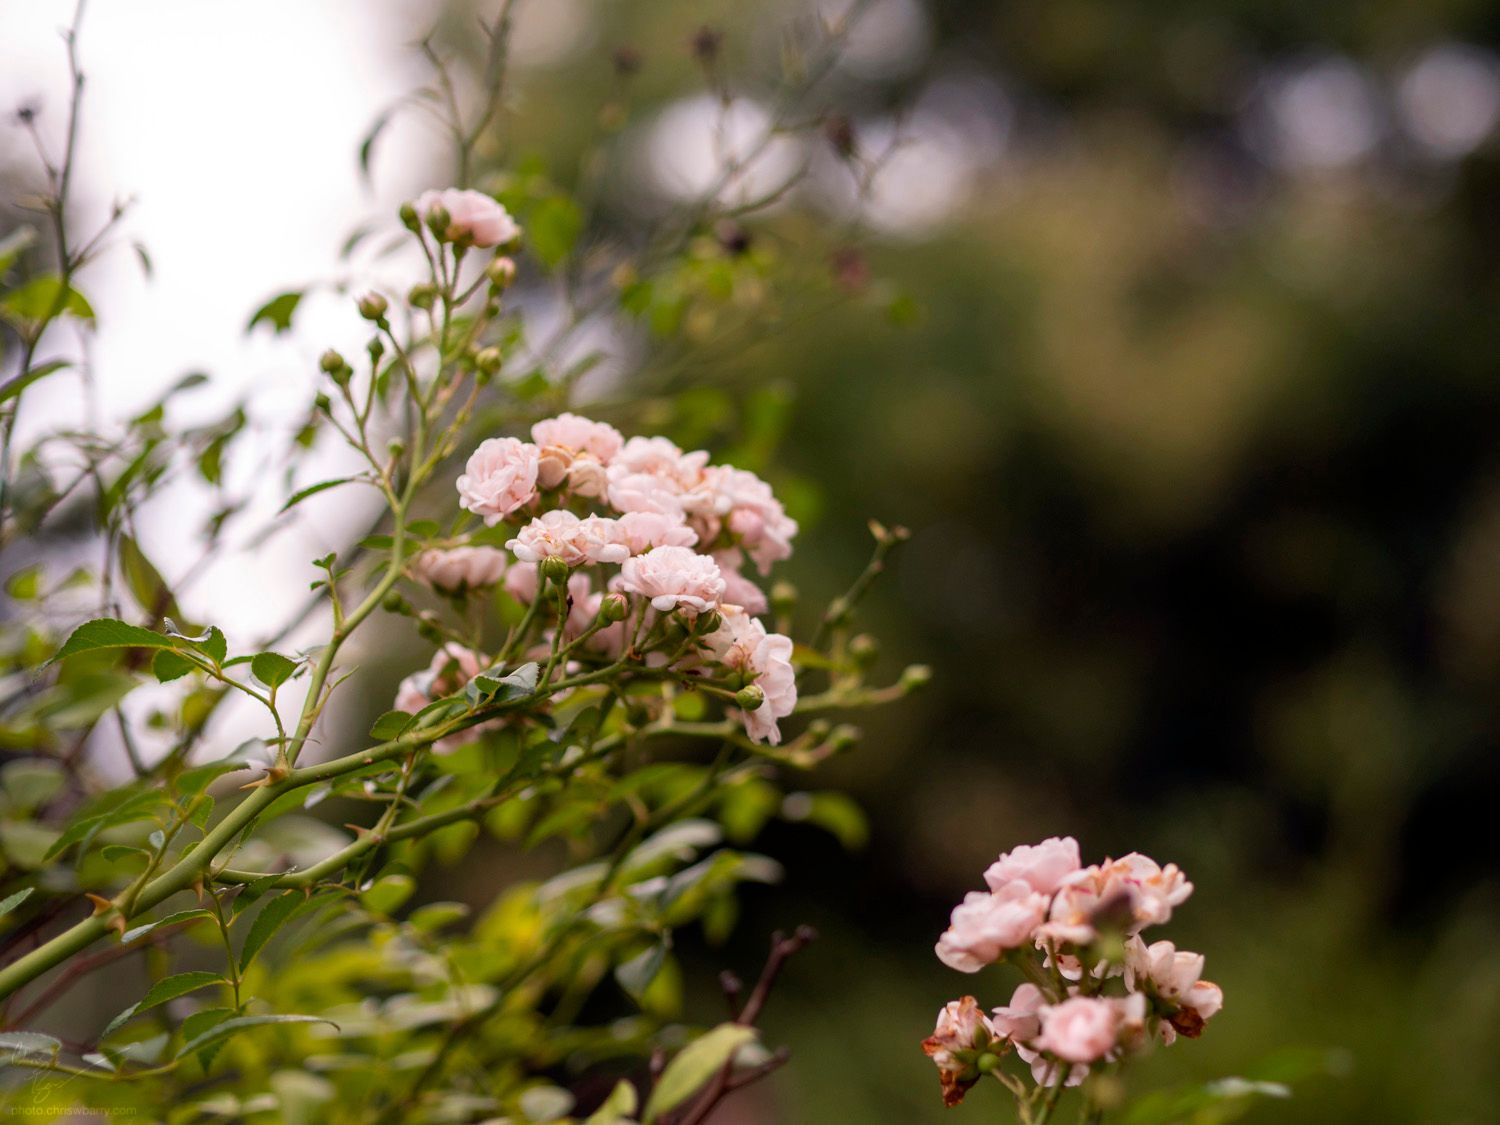 A photo with shallow depth of field of pale pink roses. The rest of the photo is out of focus greenery